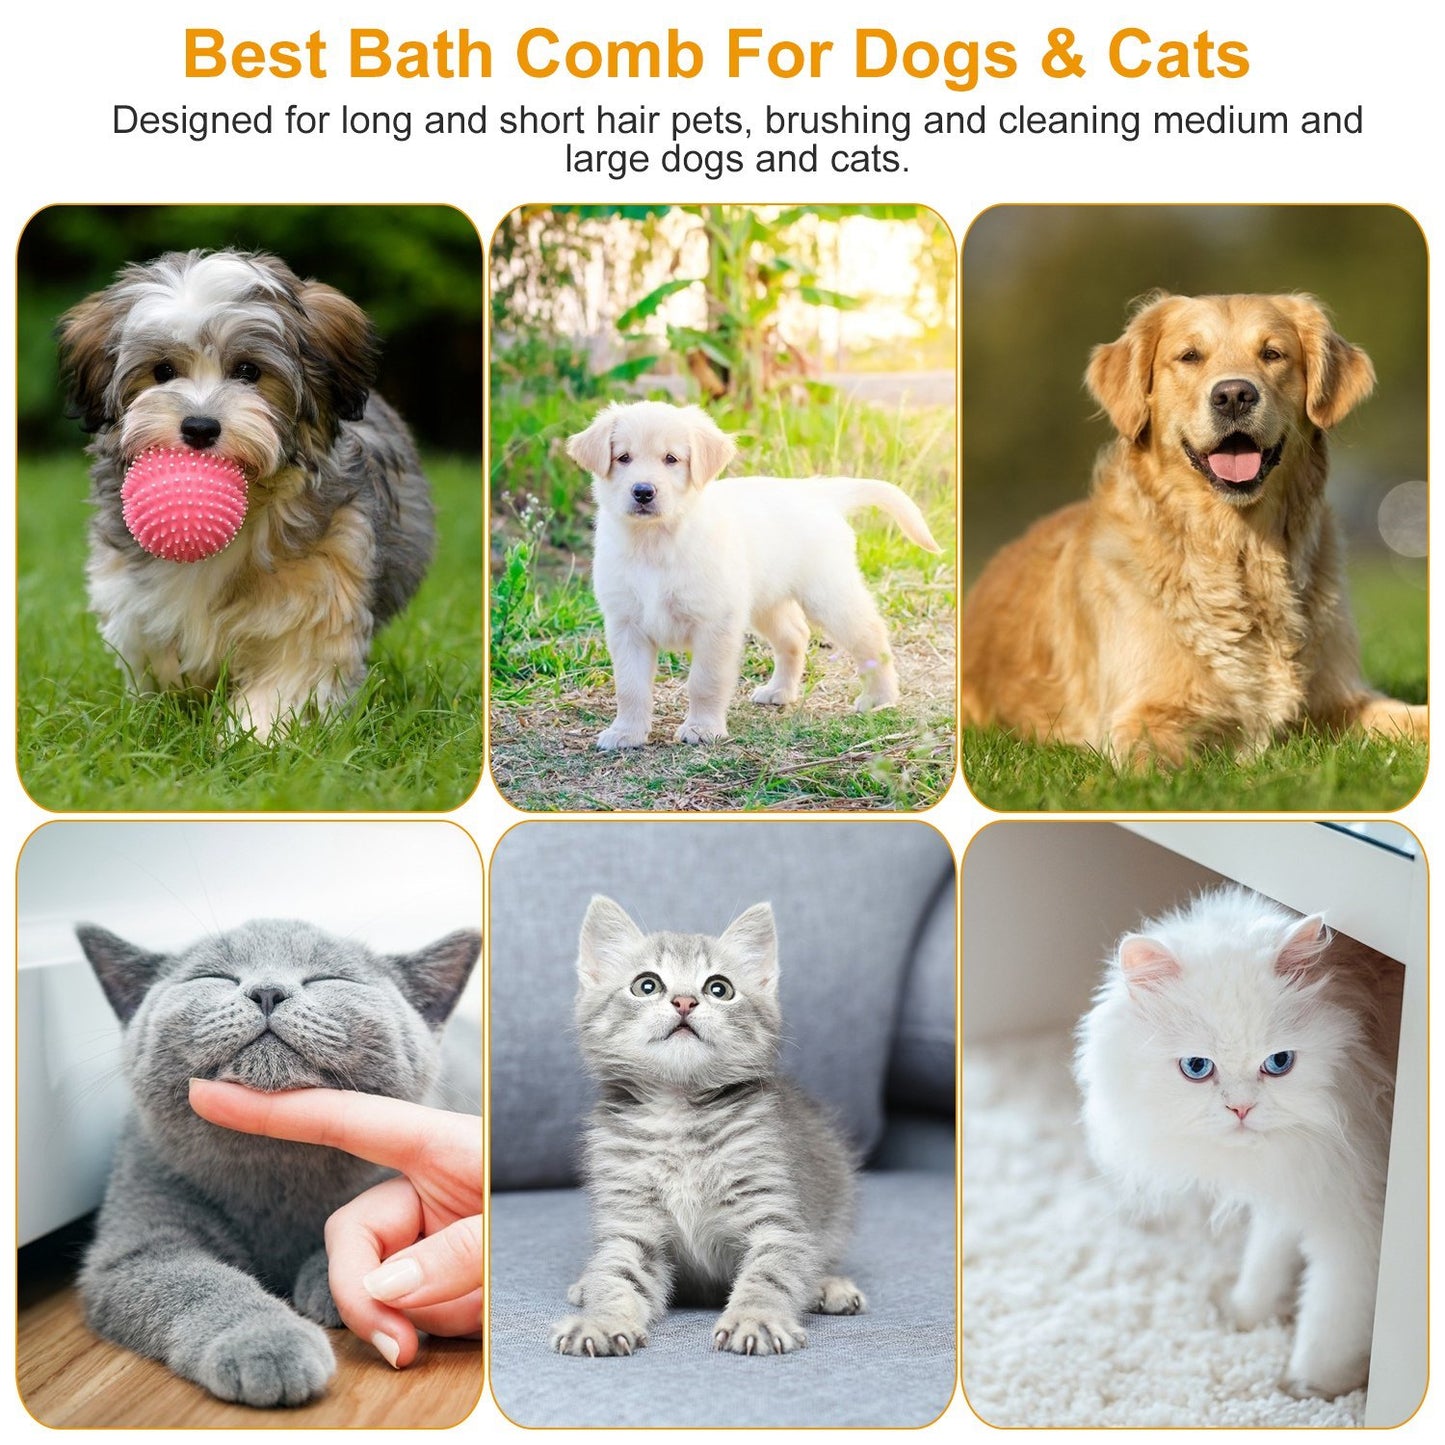 Dog Bath Brush Anti-Skid Pet Grooming Shower Bath Silicone Massage Comb For Long Short Hair Medium Large Pets Dogs Cats